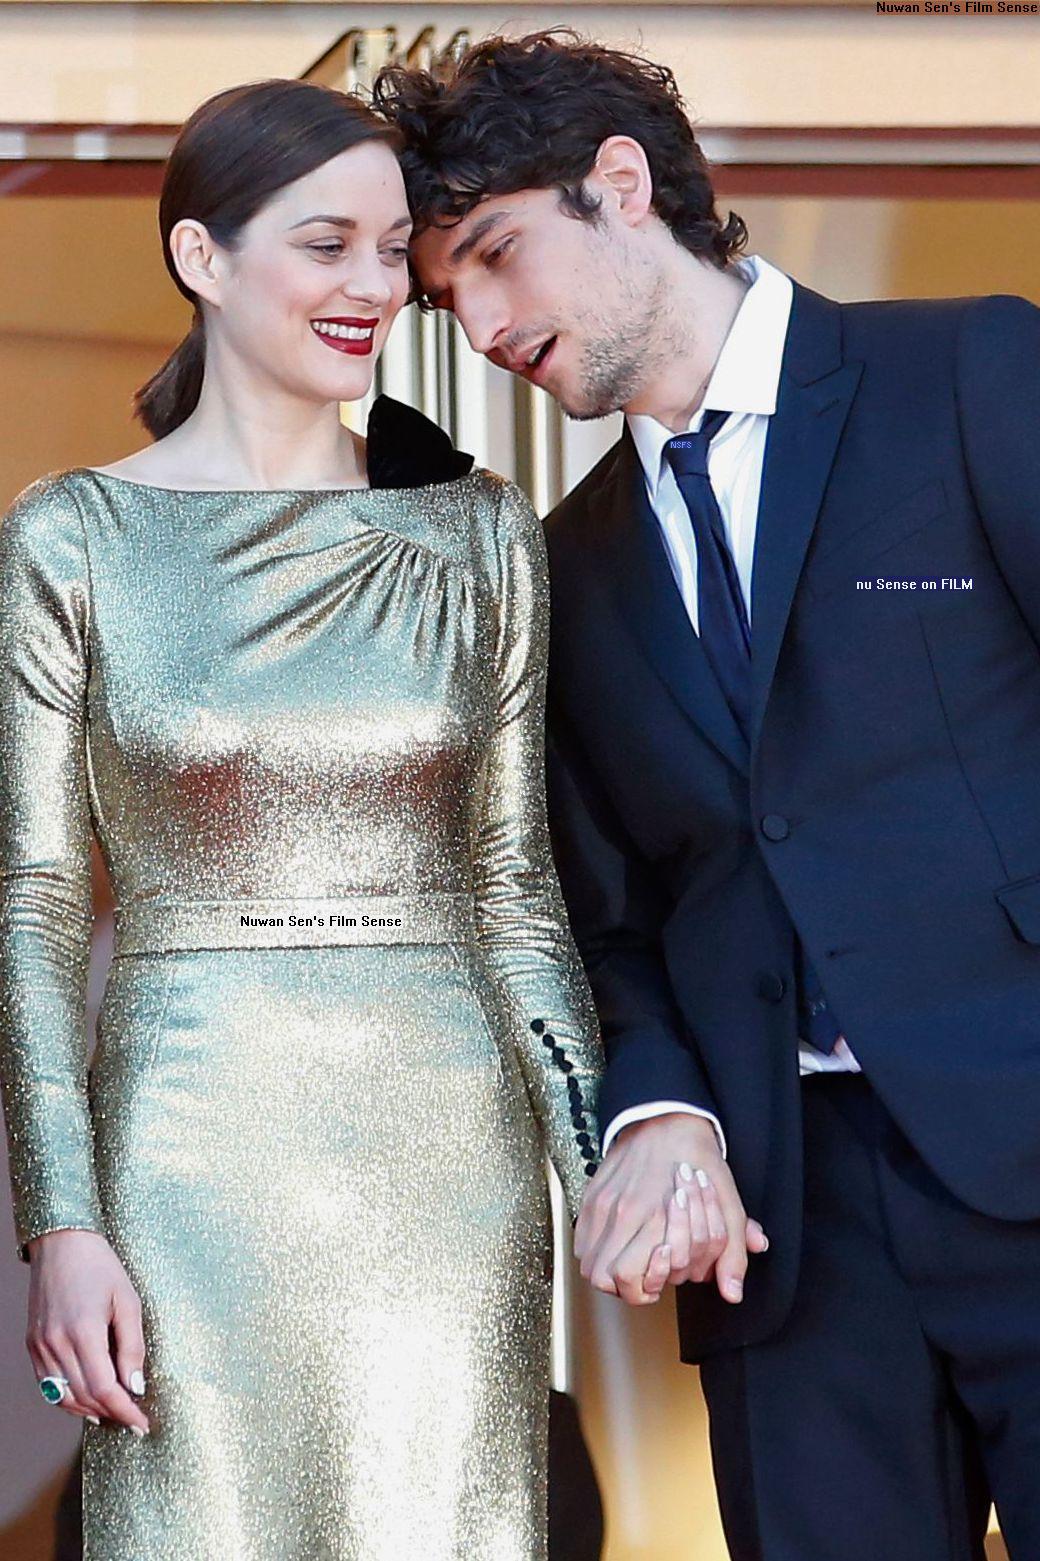 Marion Cotillard & Louis Garrel, at the 69th Cannes Film Festival, yesterday evening